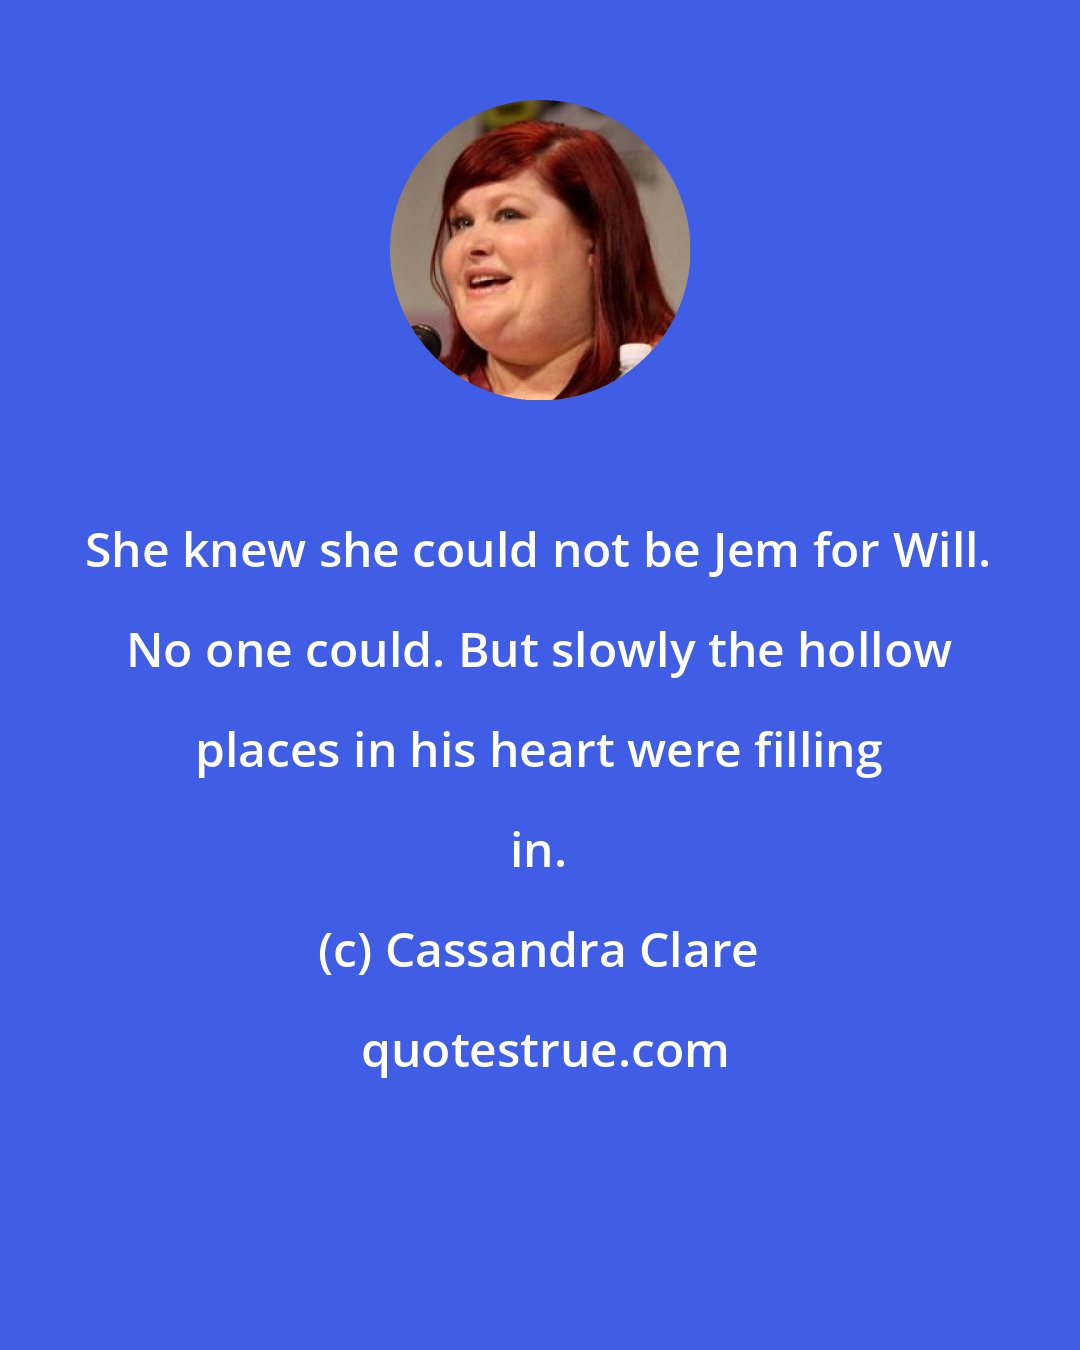 Cassandra Clare: She knew she could not be Jem for Will. No one could. But slowly the hollow places in his heart were filling in.